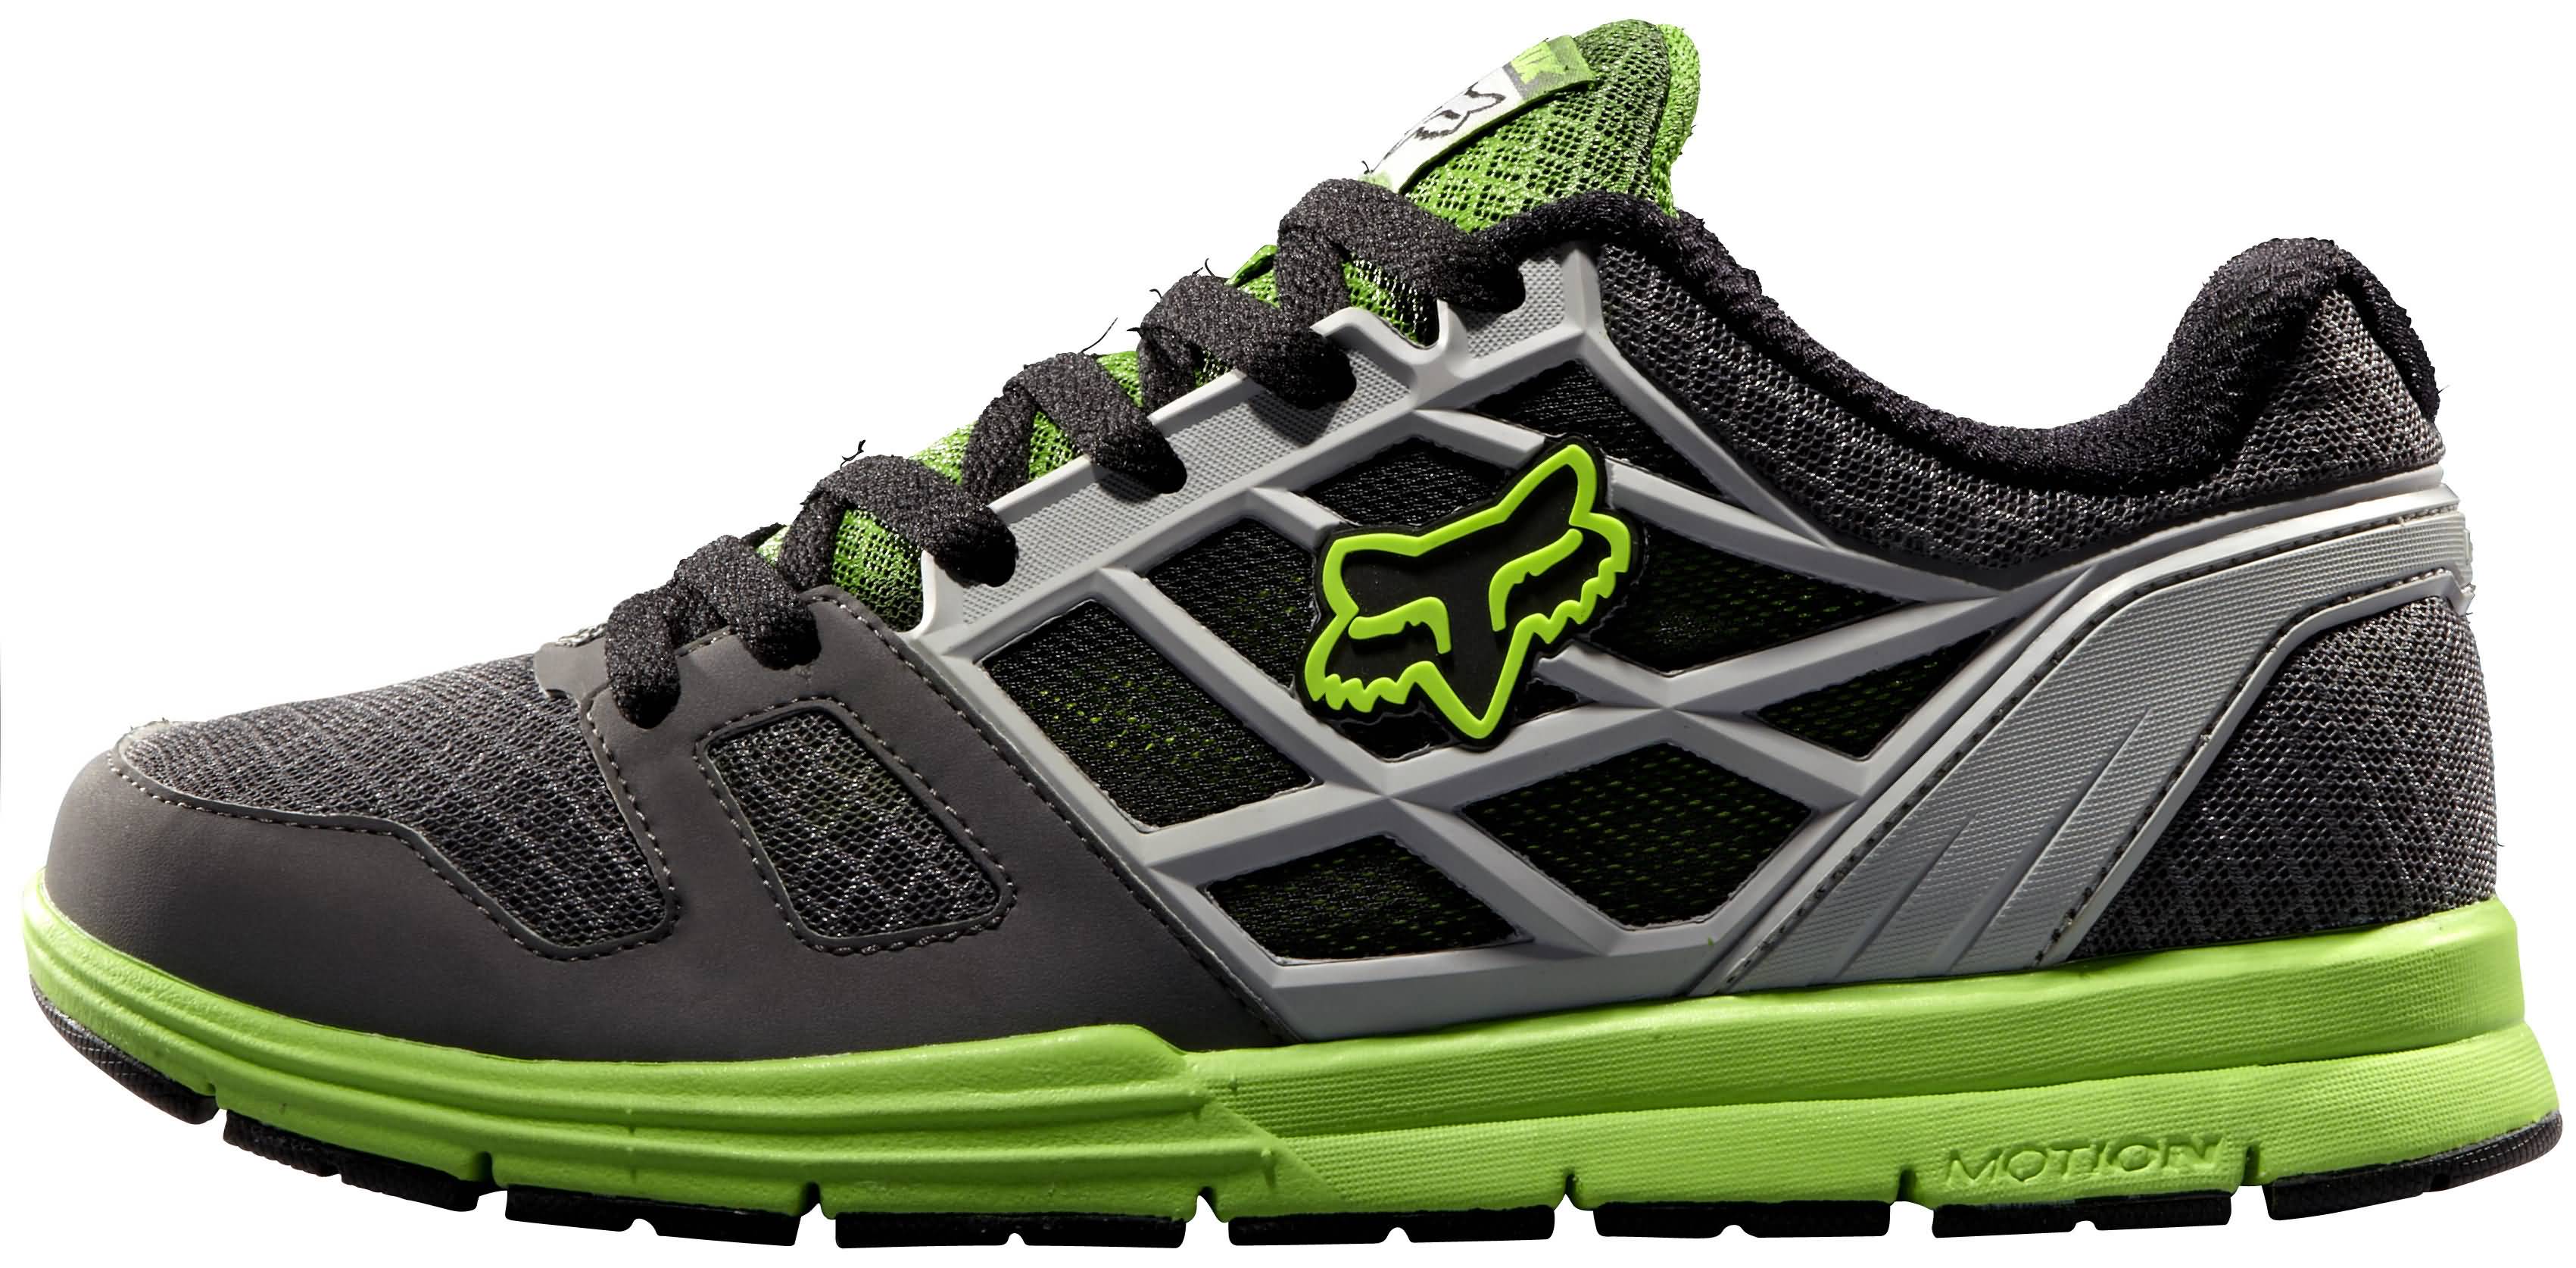 Fox Racing Fall 2013 Mens Shoes Performance Footwear Collection